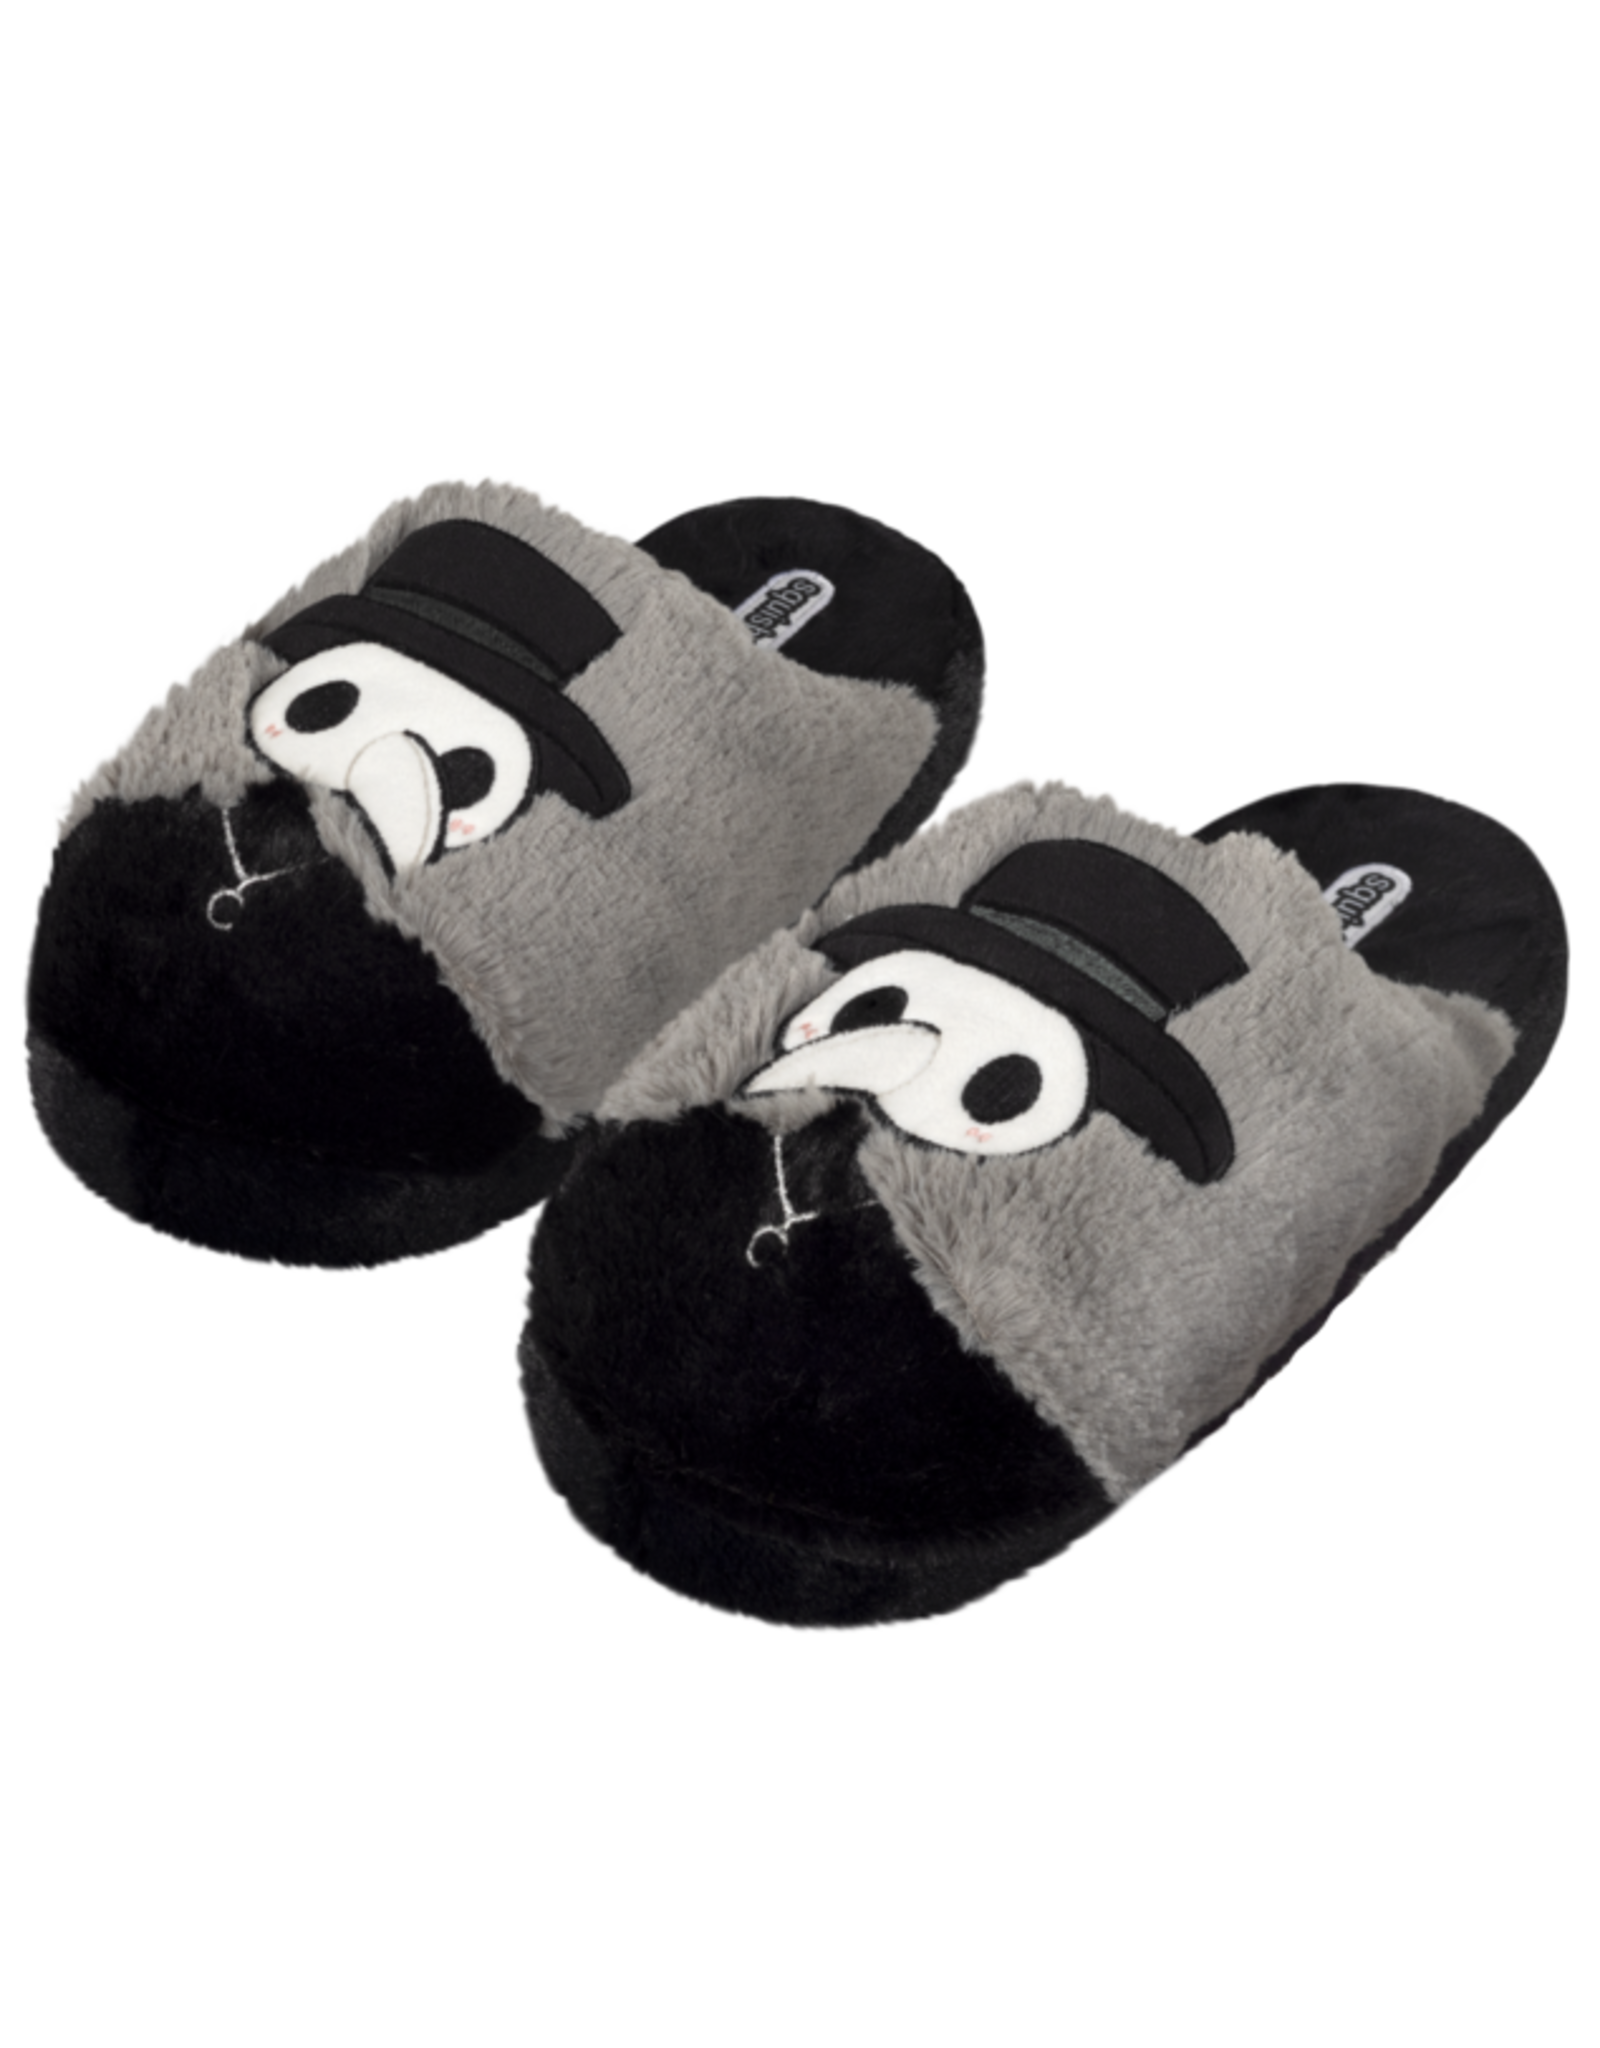 Squishable Squishable Plague Doctor Slippers - Adult XS/S